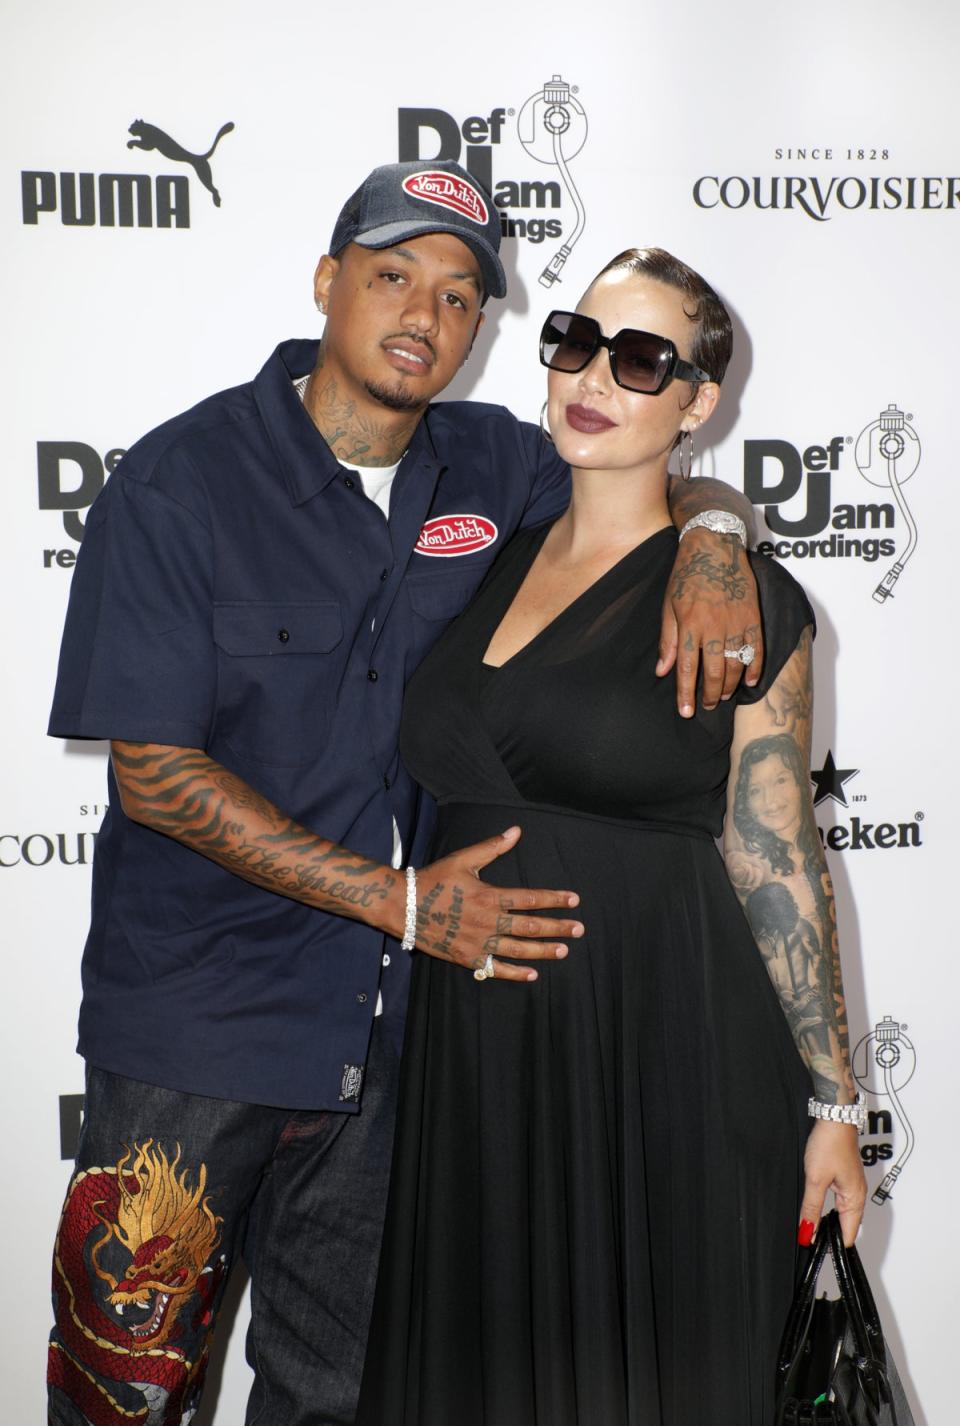 Edwards was previously in a relationship with Amber Rose and the pair share a son (Getty Images for Def Jam)